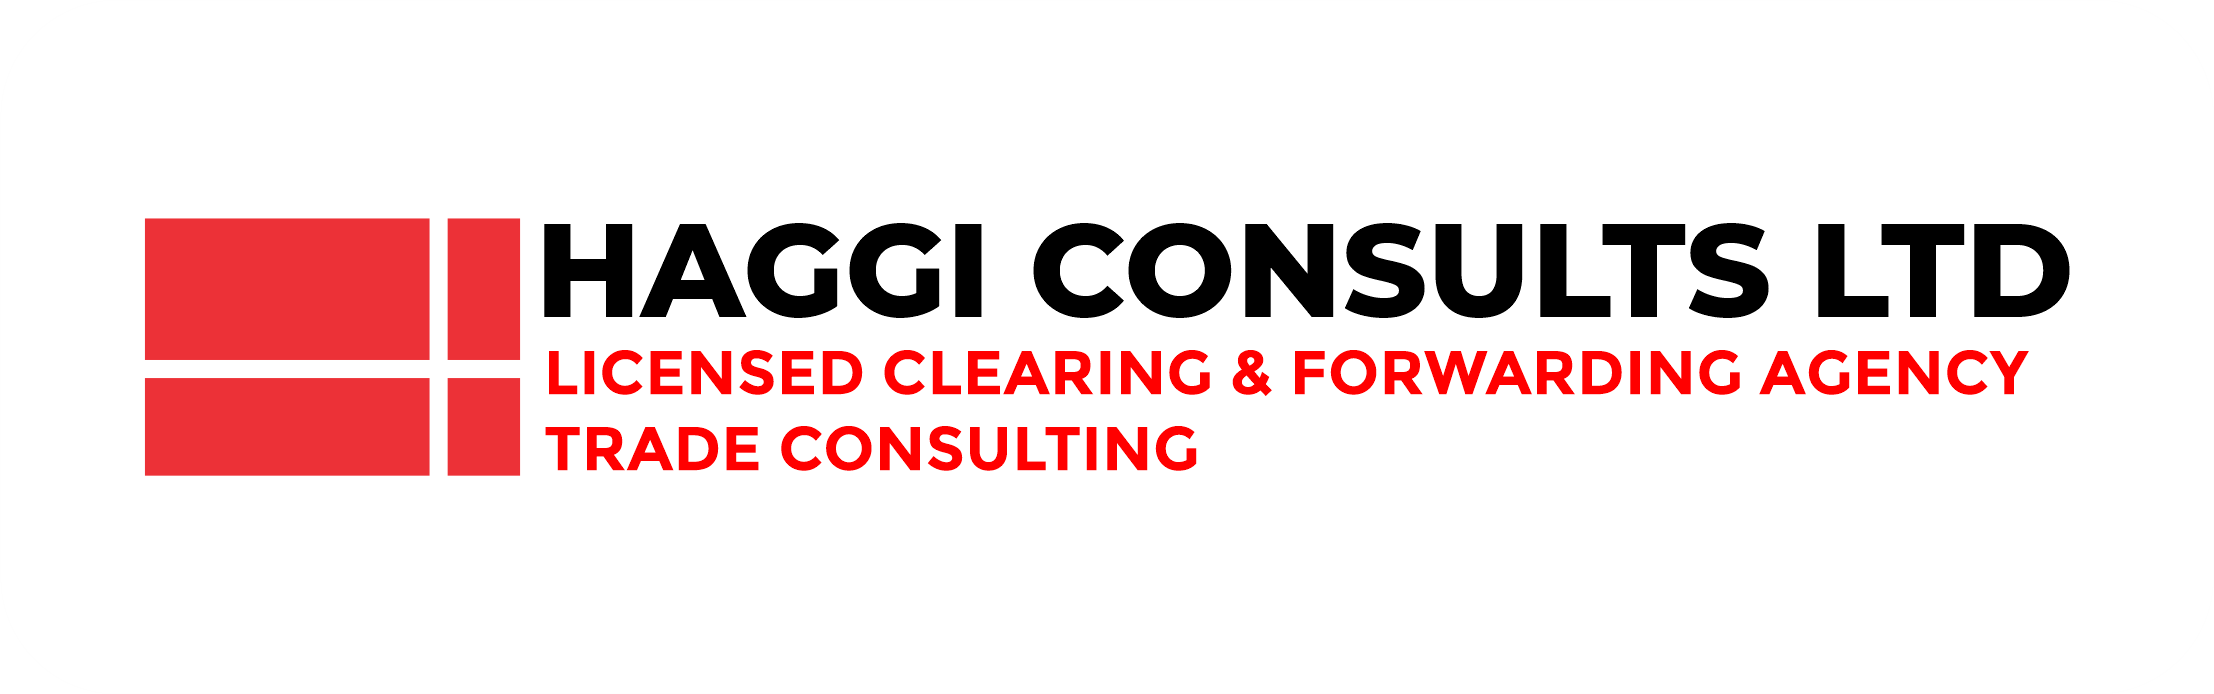 Licensed Clearing And Forwarding AgencyHaggi Consults Ltd